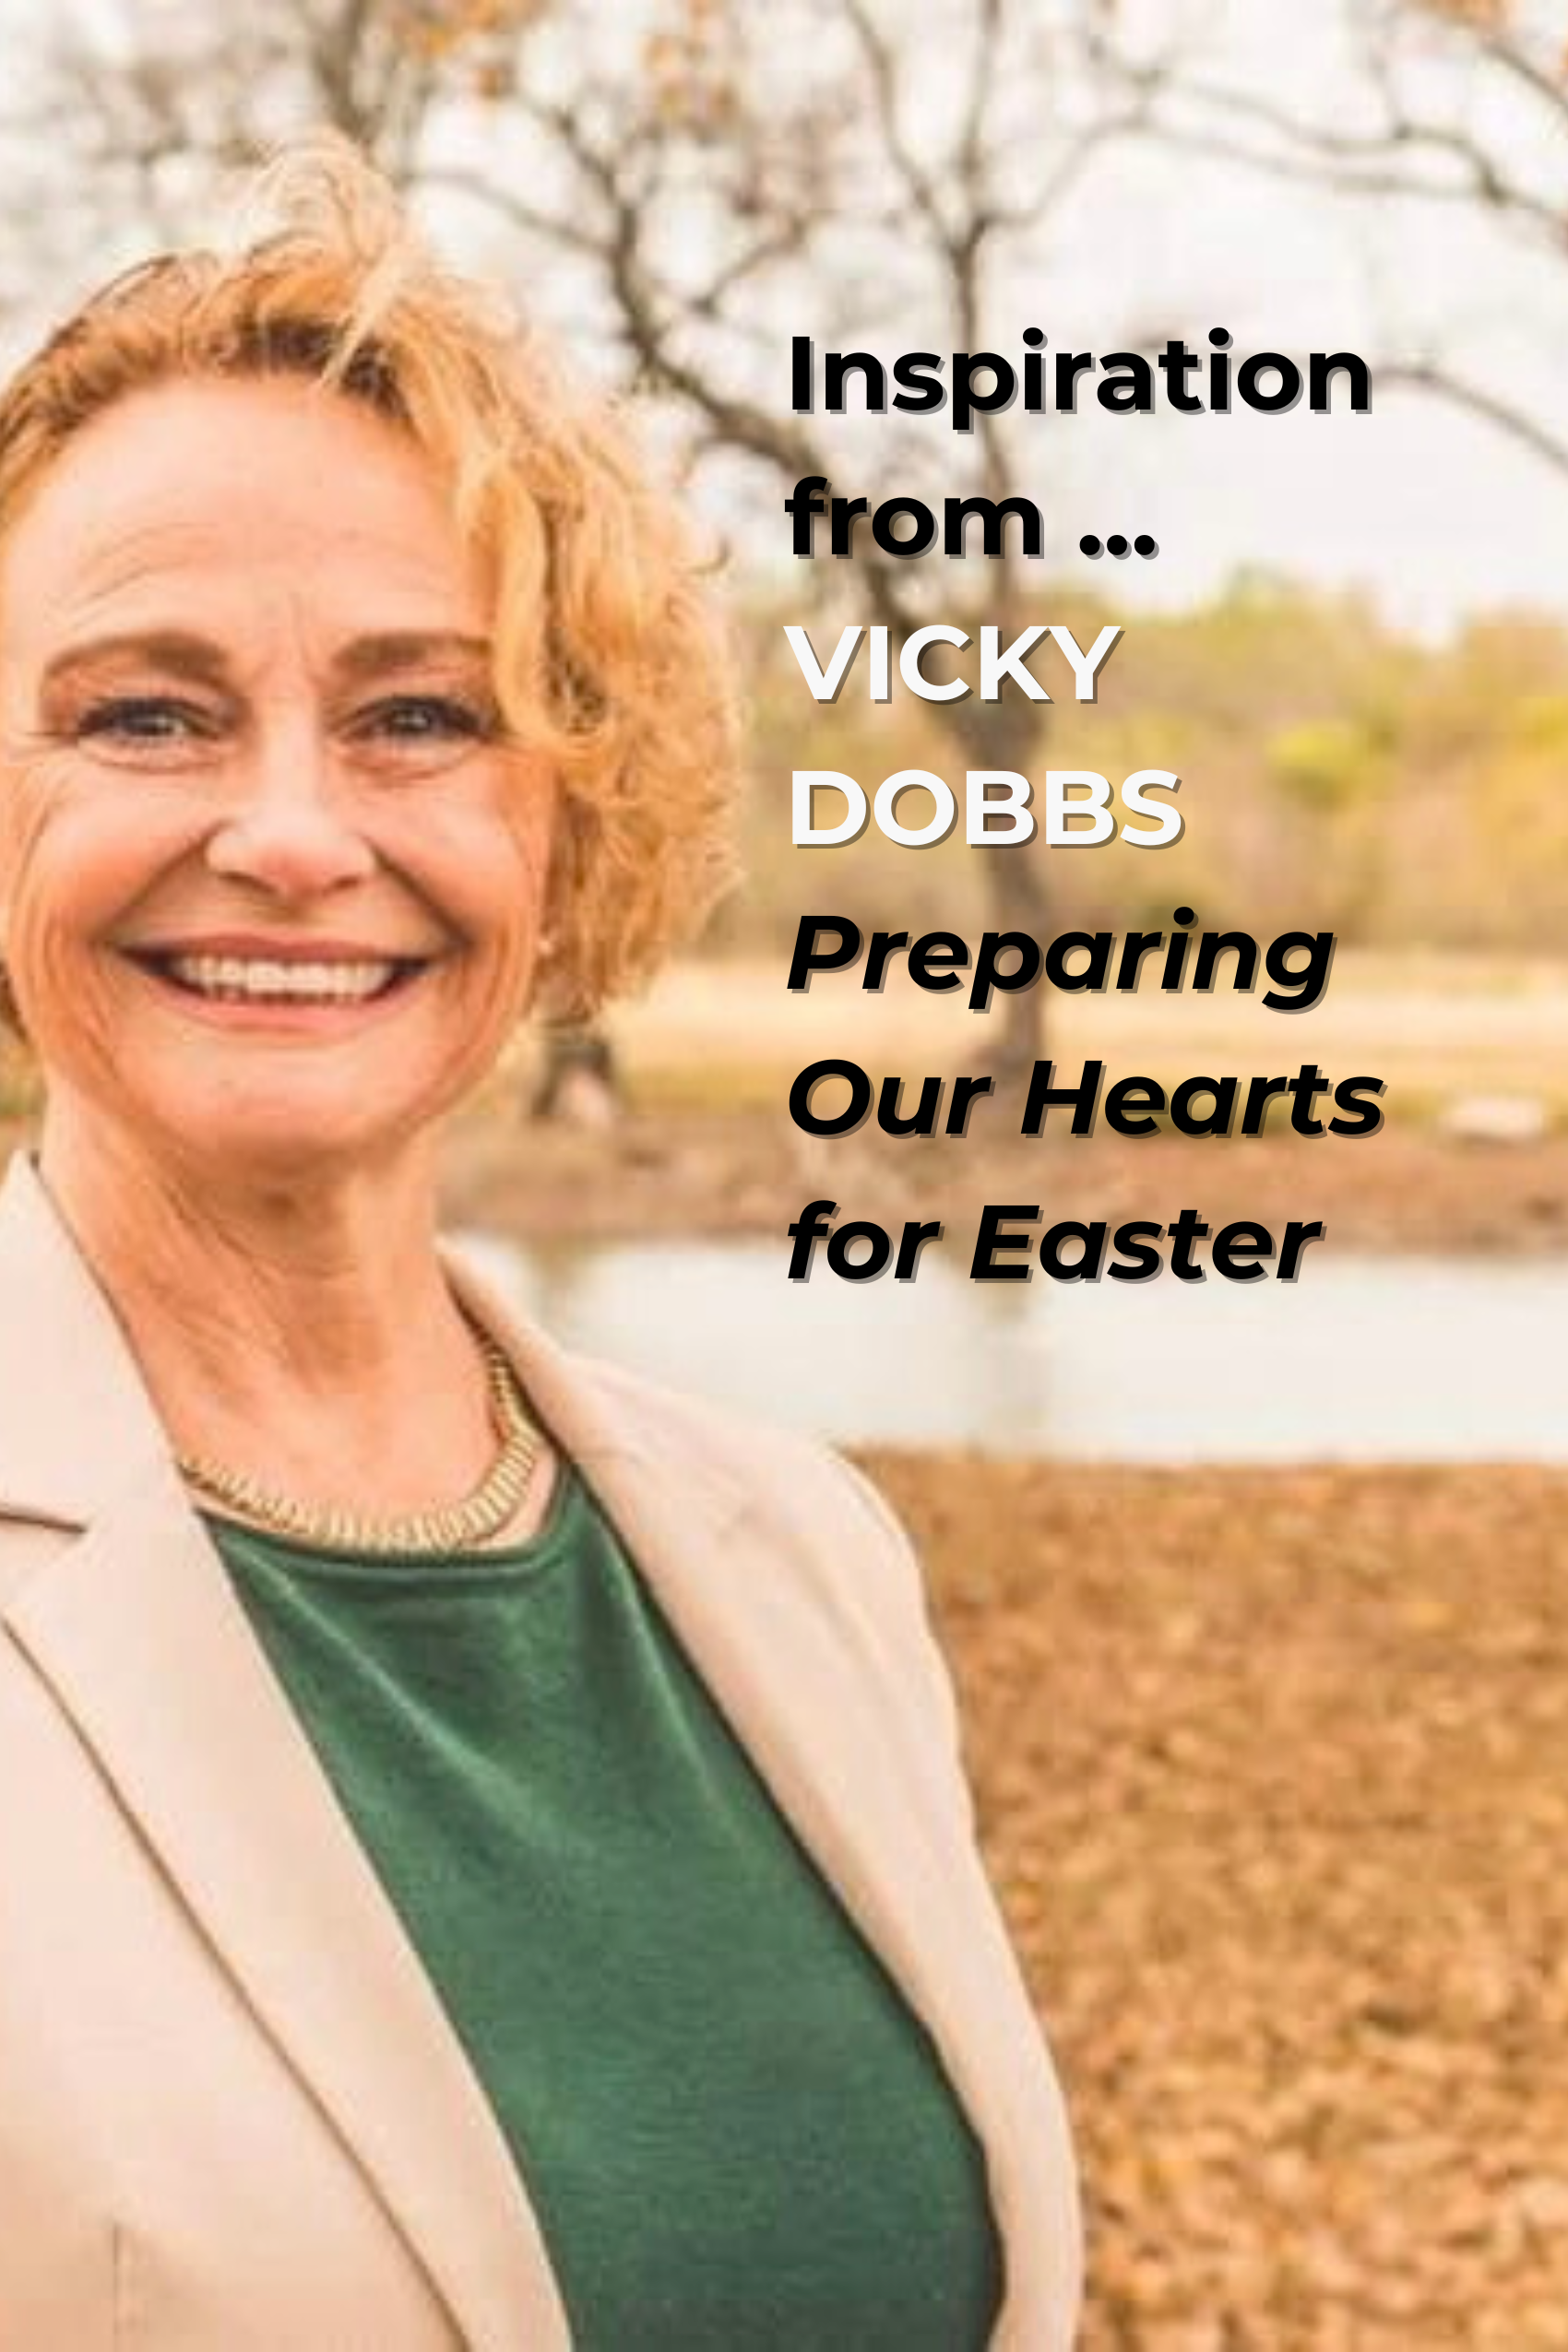 Preparing Our Hearts for Easter with Vicky Dobbs